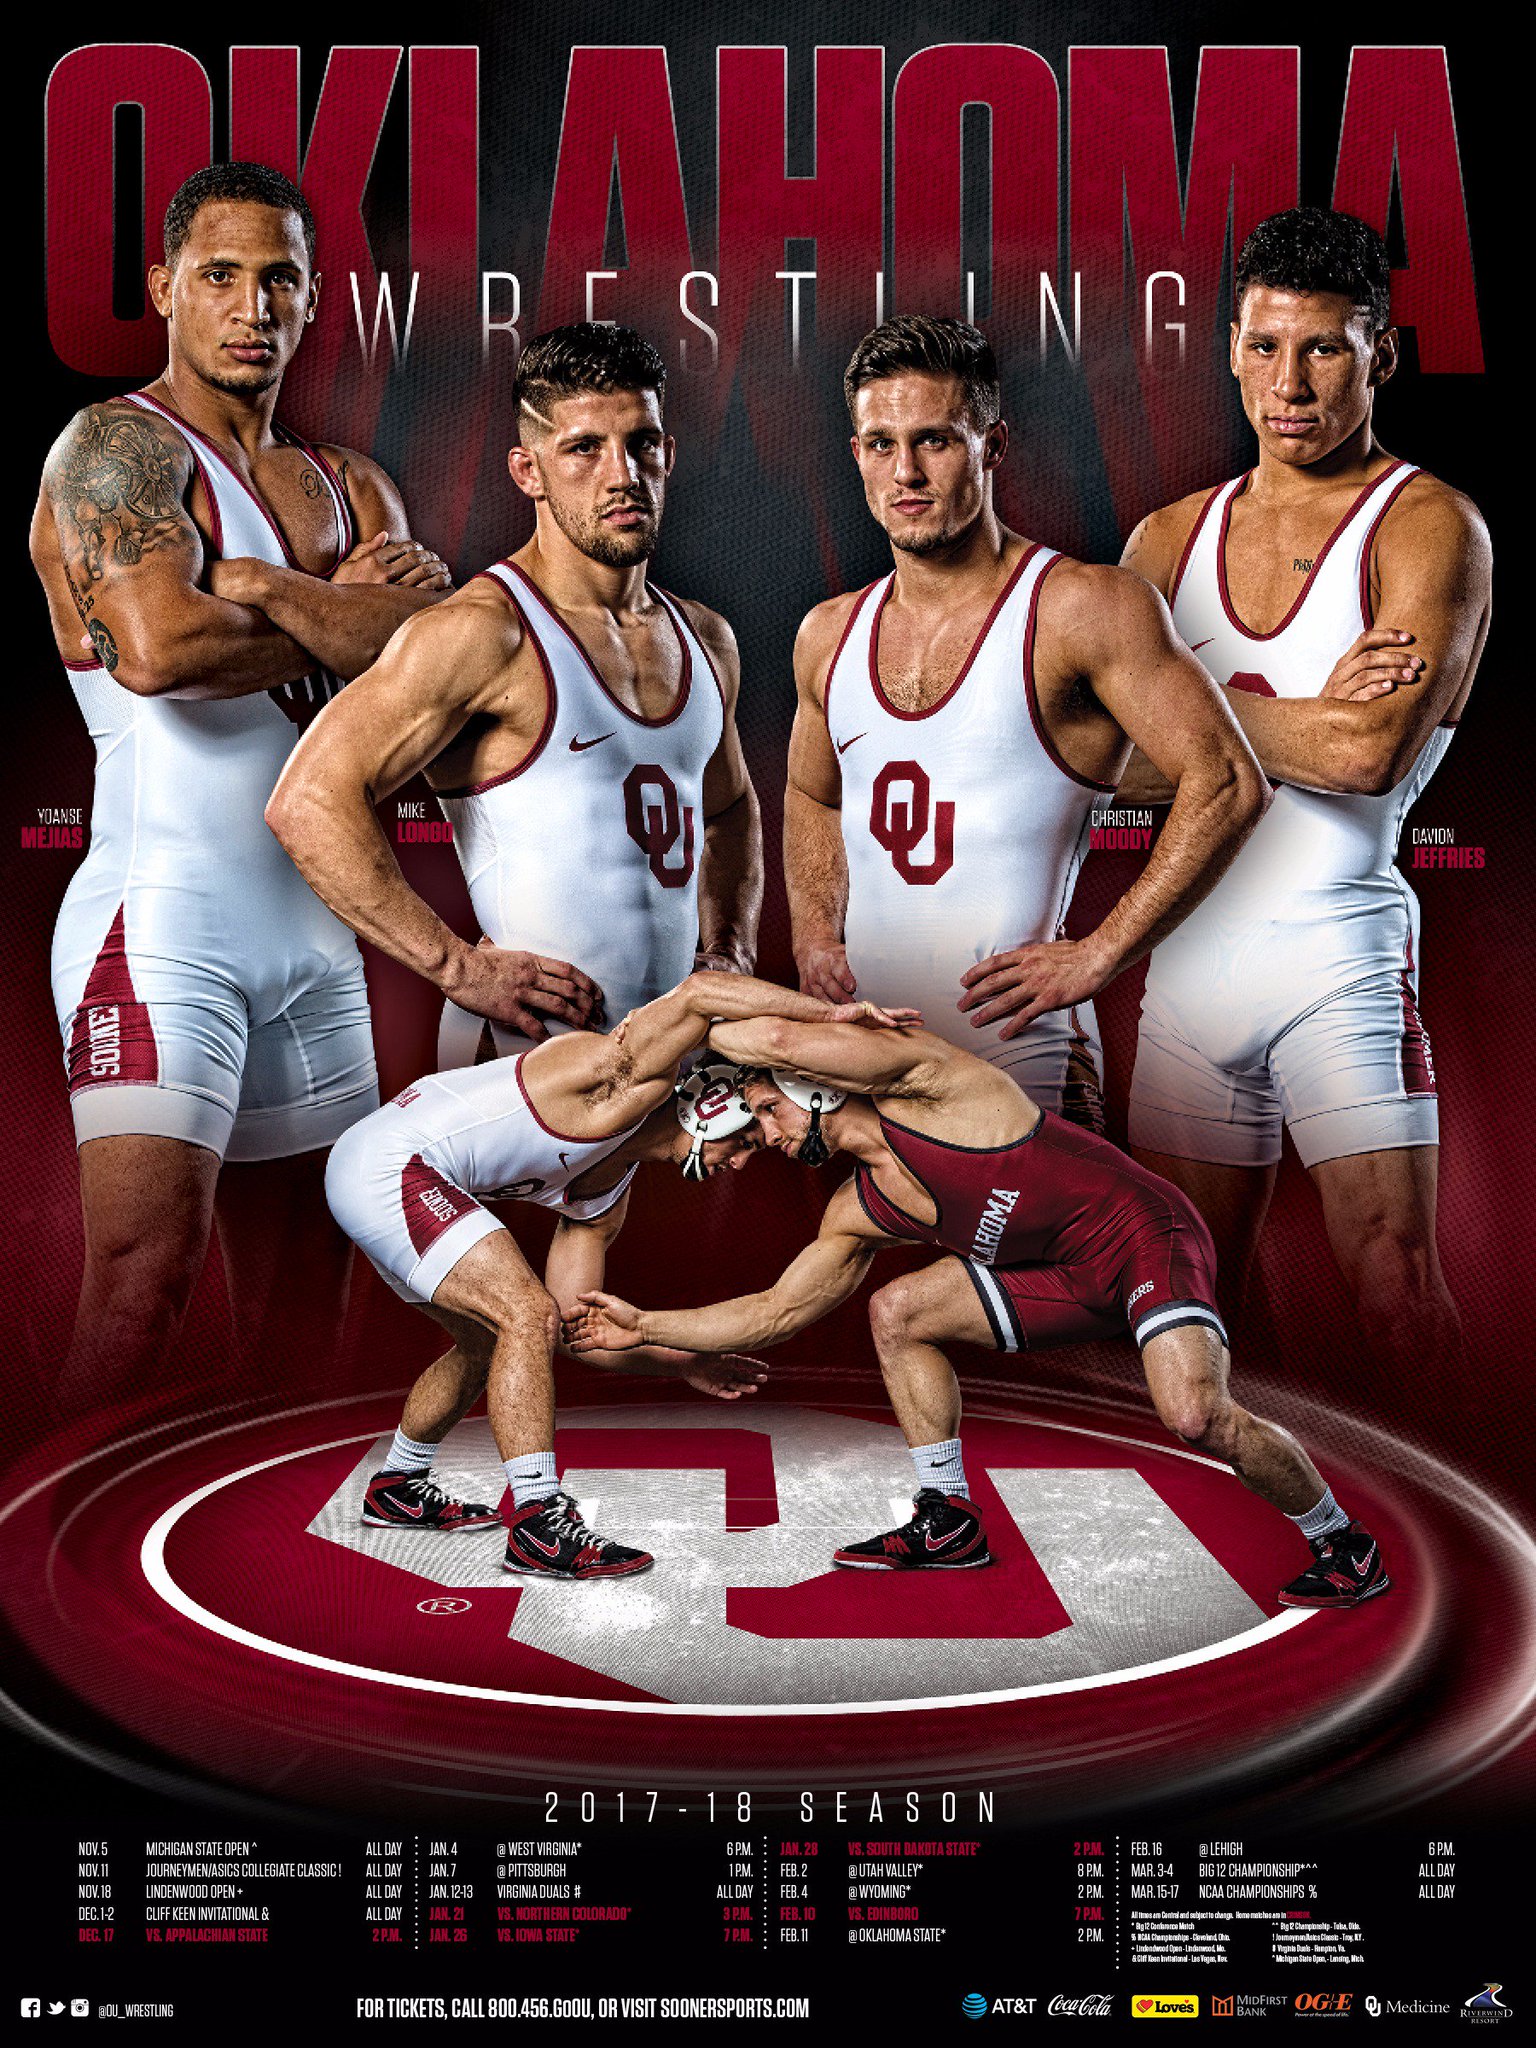 NCAA Wrestling on Twitter: "These Big 12 team posters. 💯…